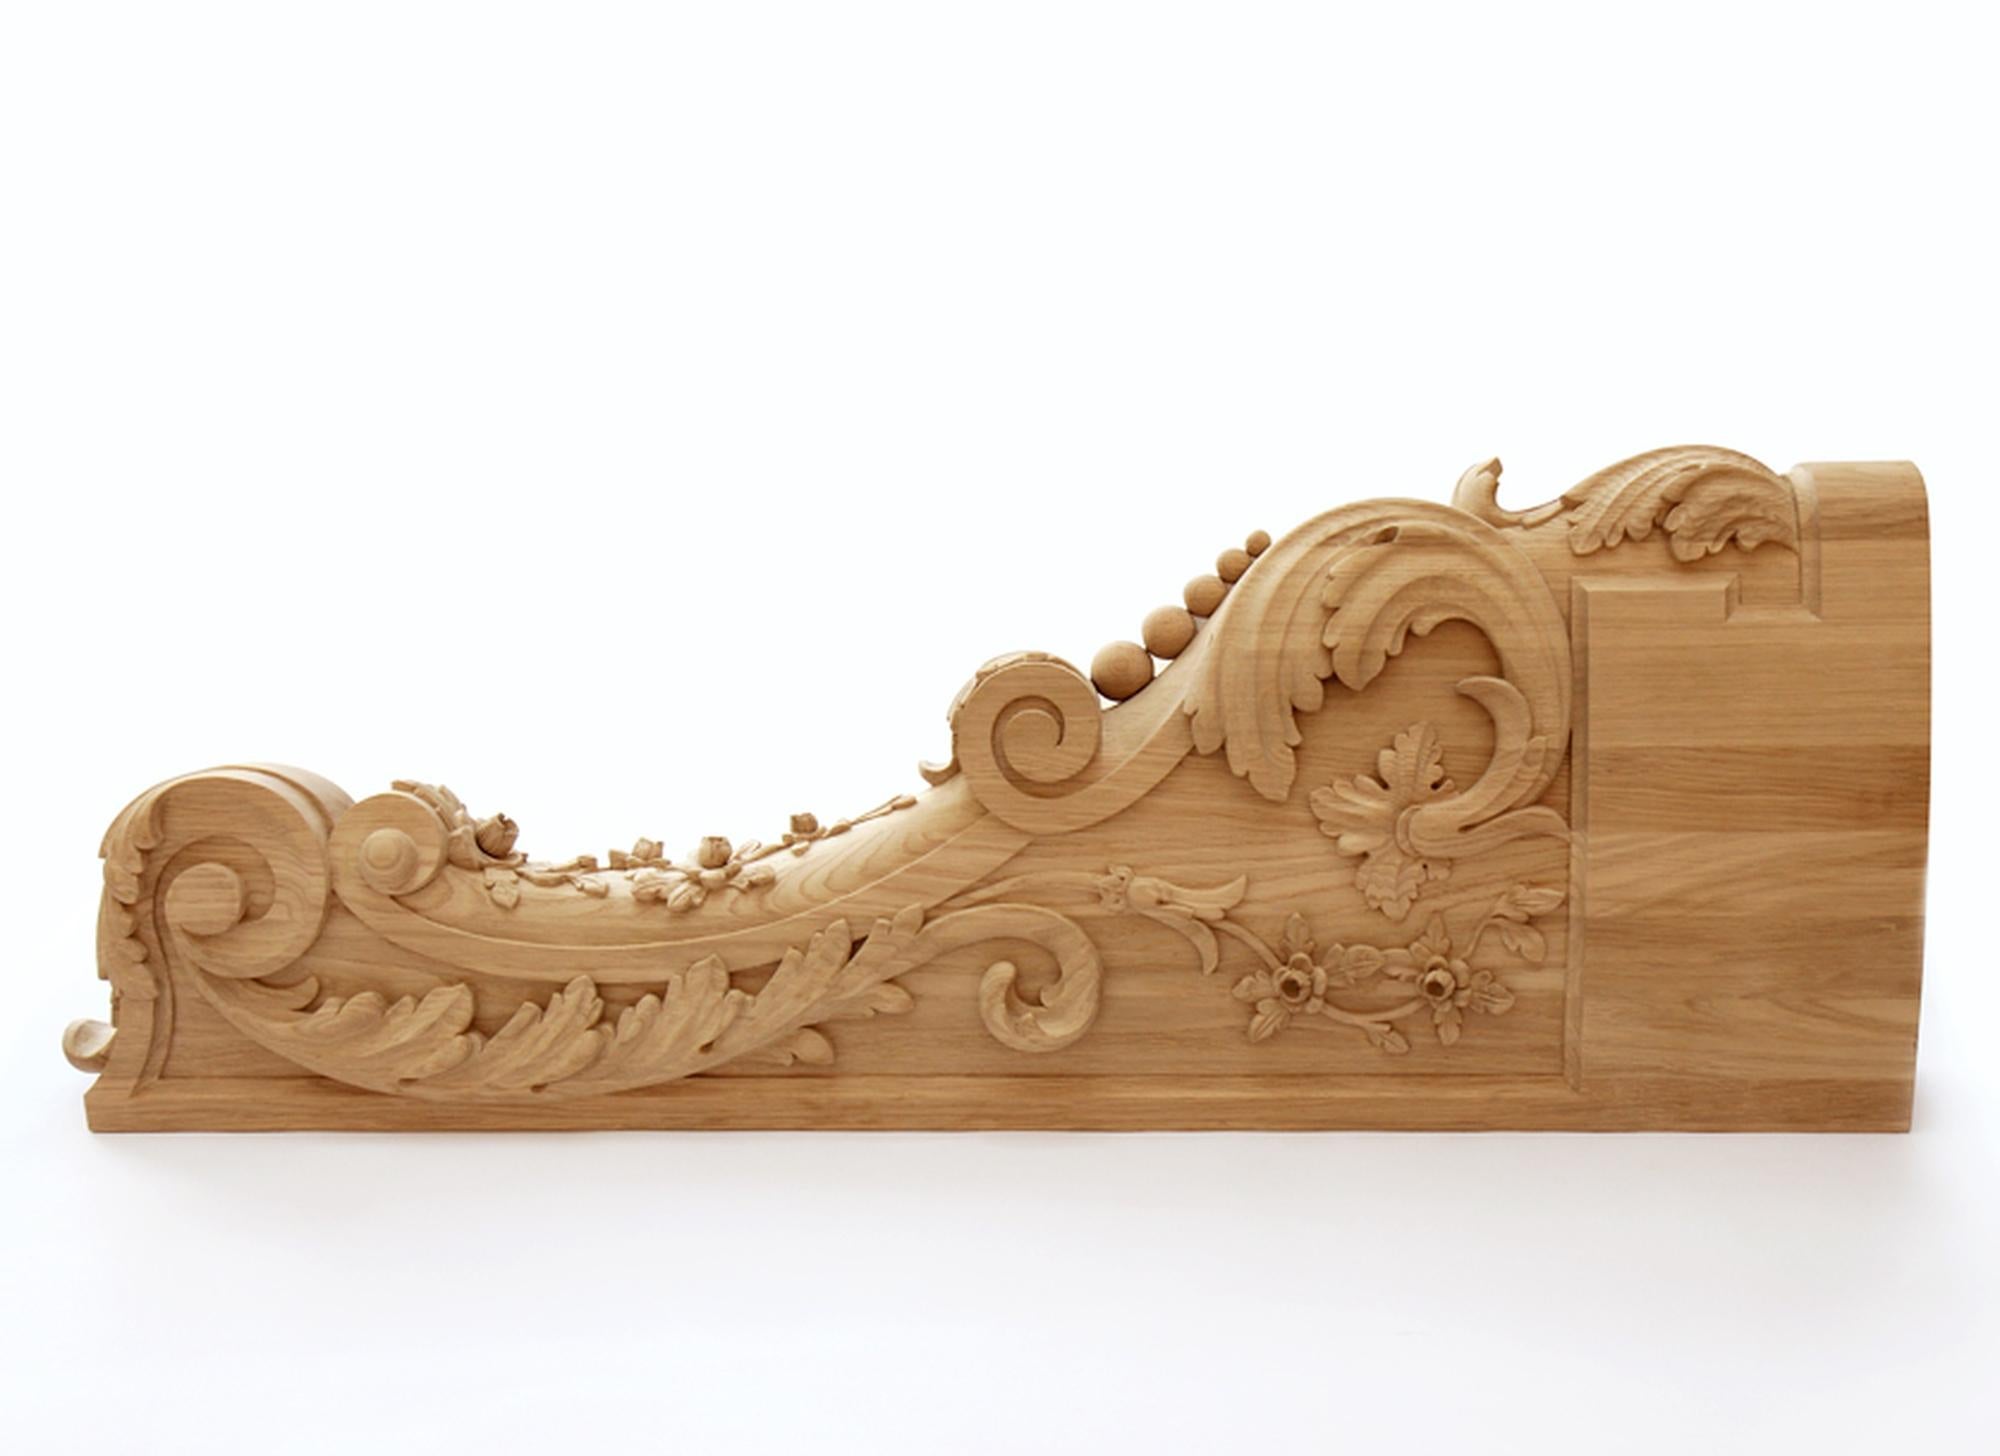 Unfinished high quality carved Newel Post from oak or beech of your choice.

>> SKU: L-003R

>> Dimensions (A x B x C x e):

- 48.9